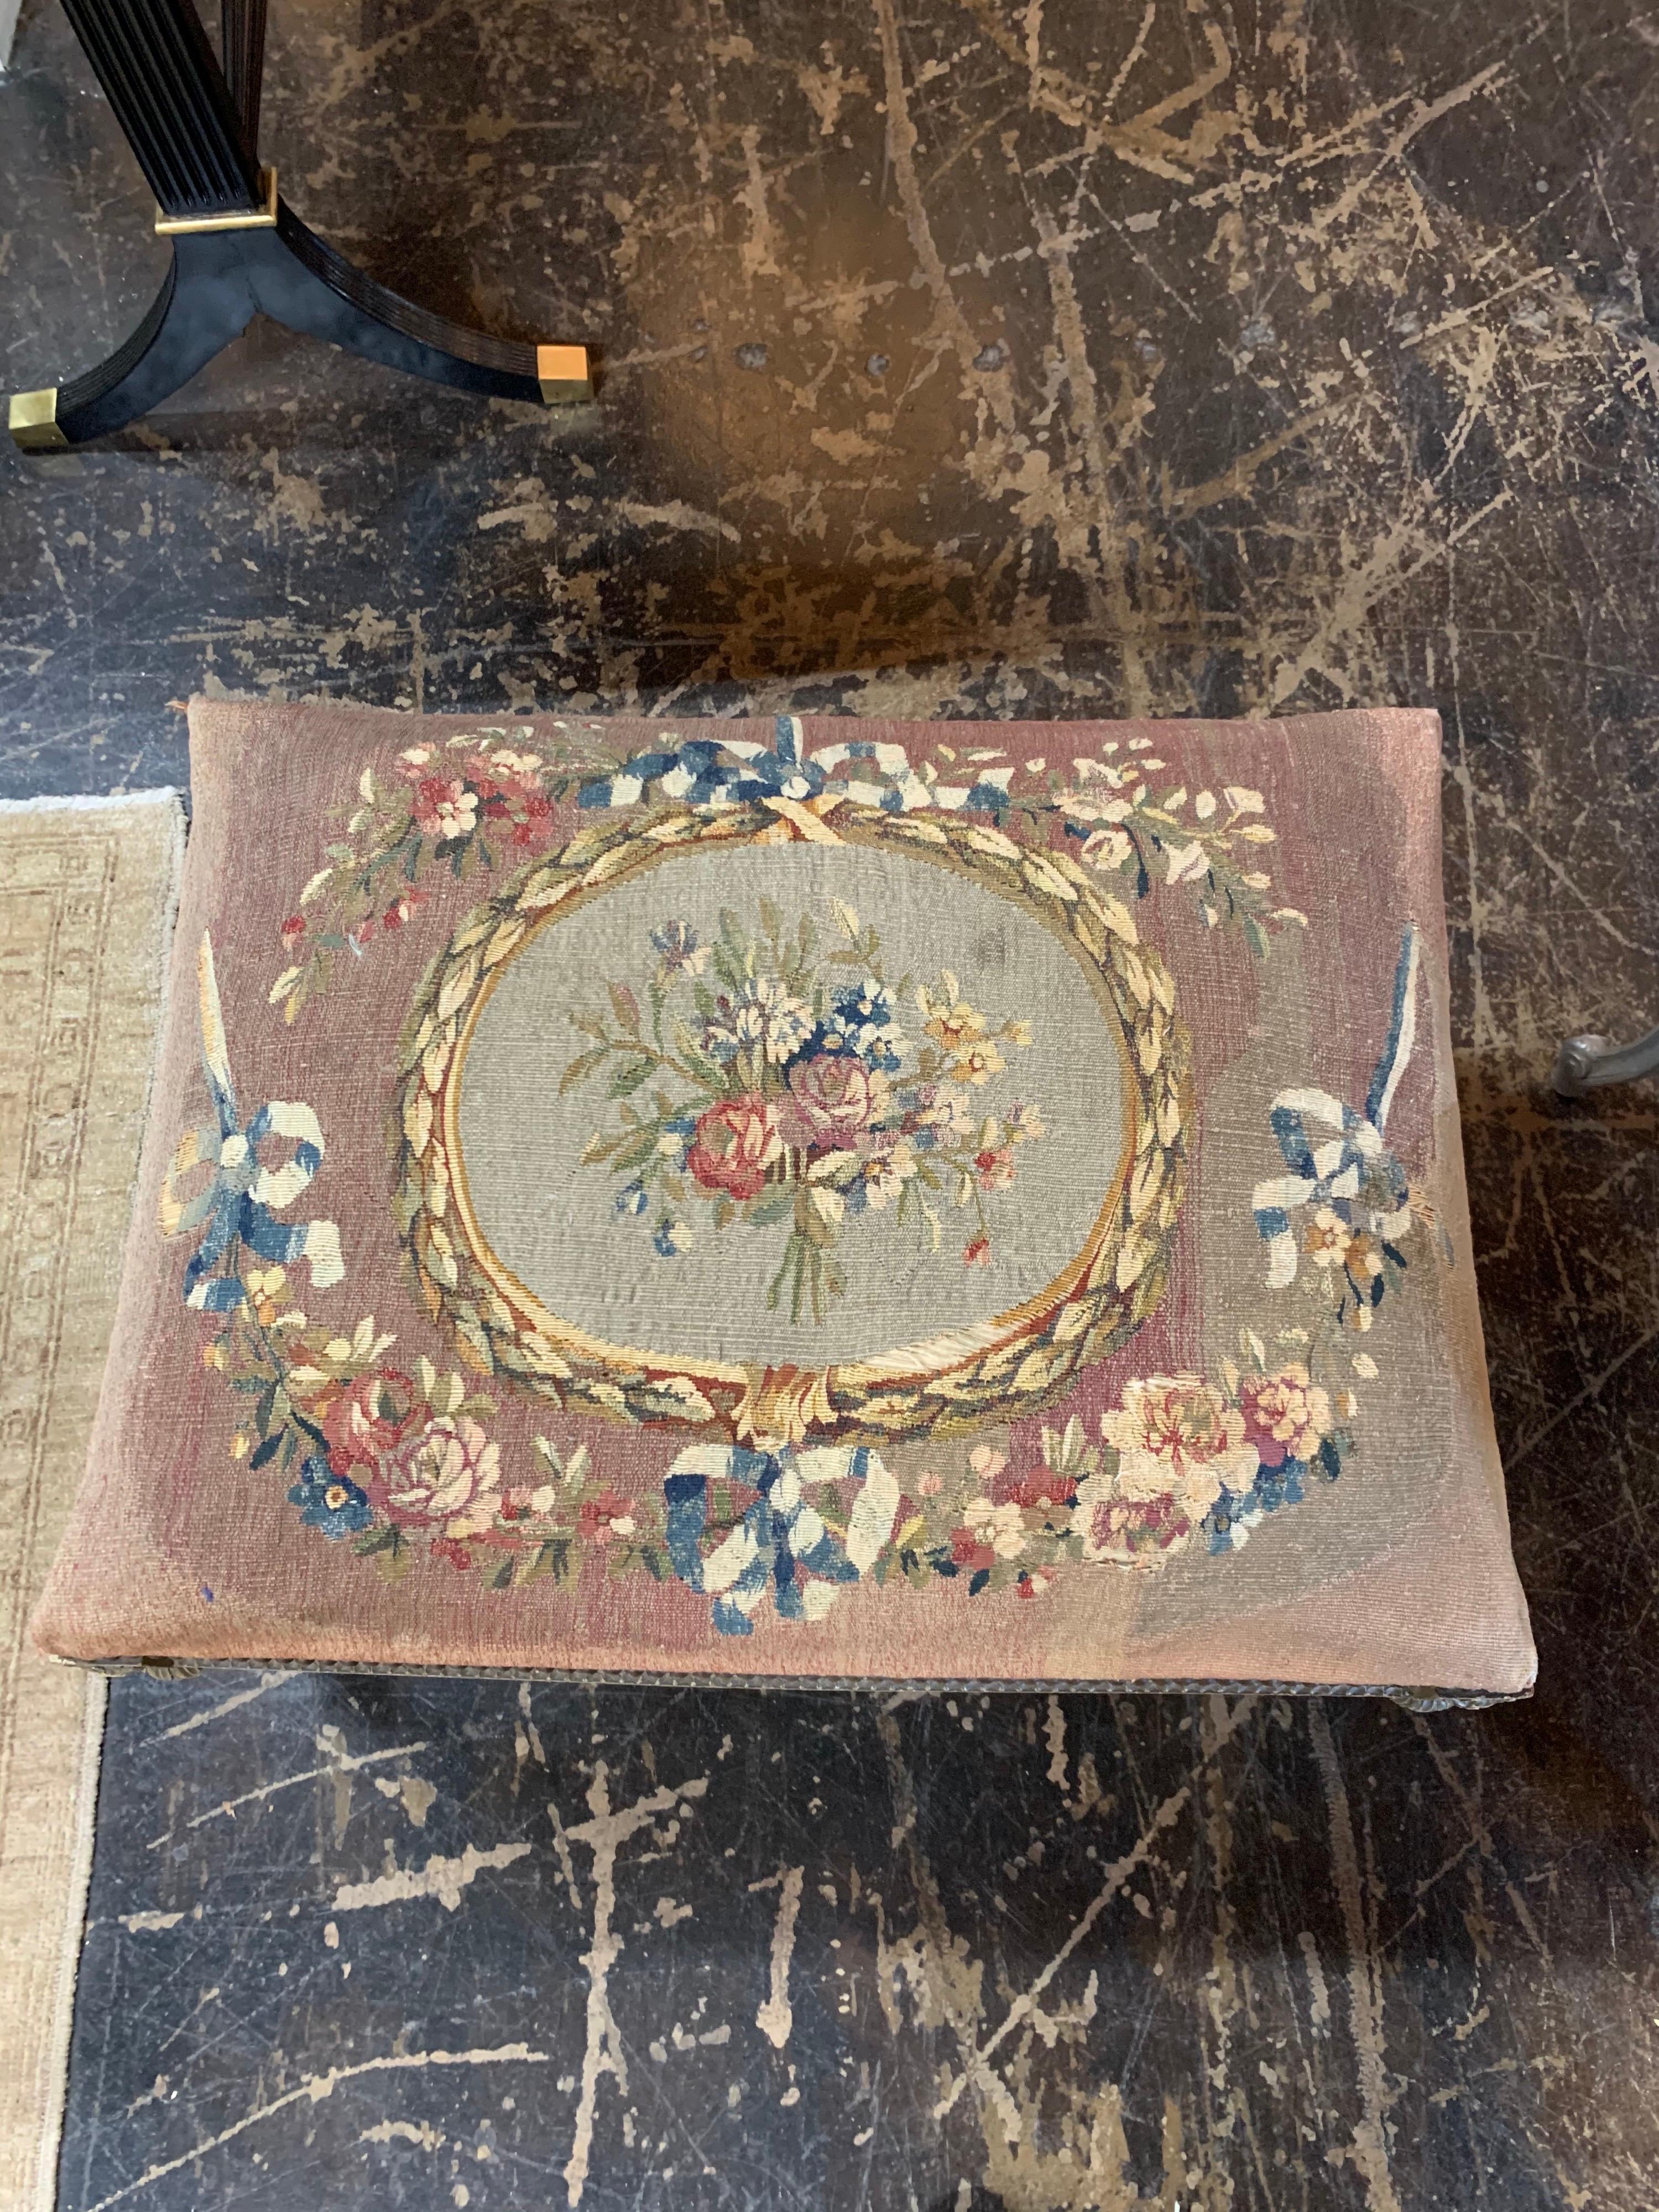 Beautiful 19th century French Louis XVI style carved and painted ottoman. This piece is upholstered in a pretty floral tapestry. A true classic!